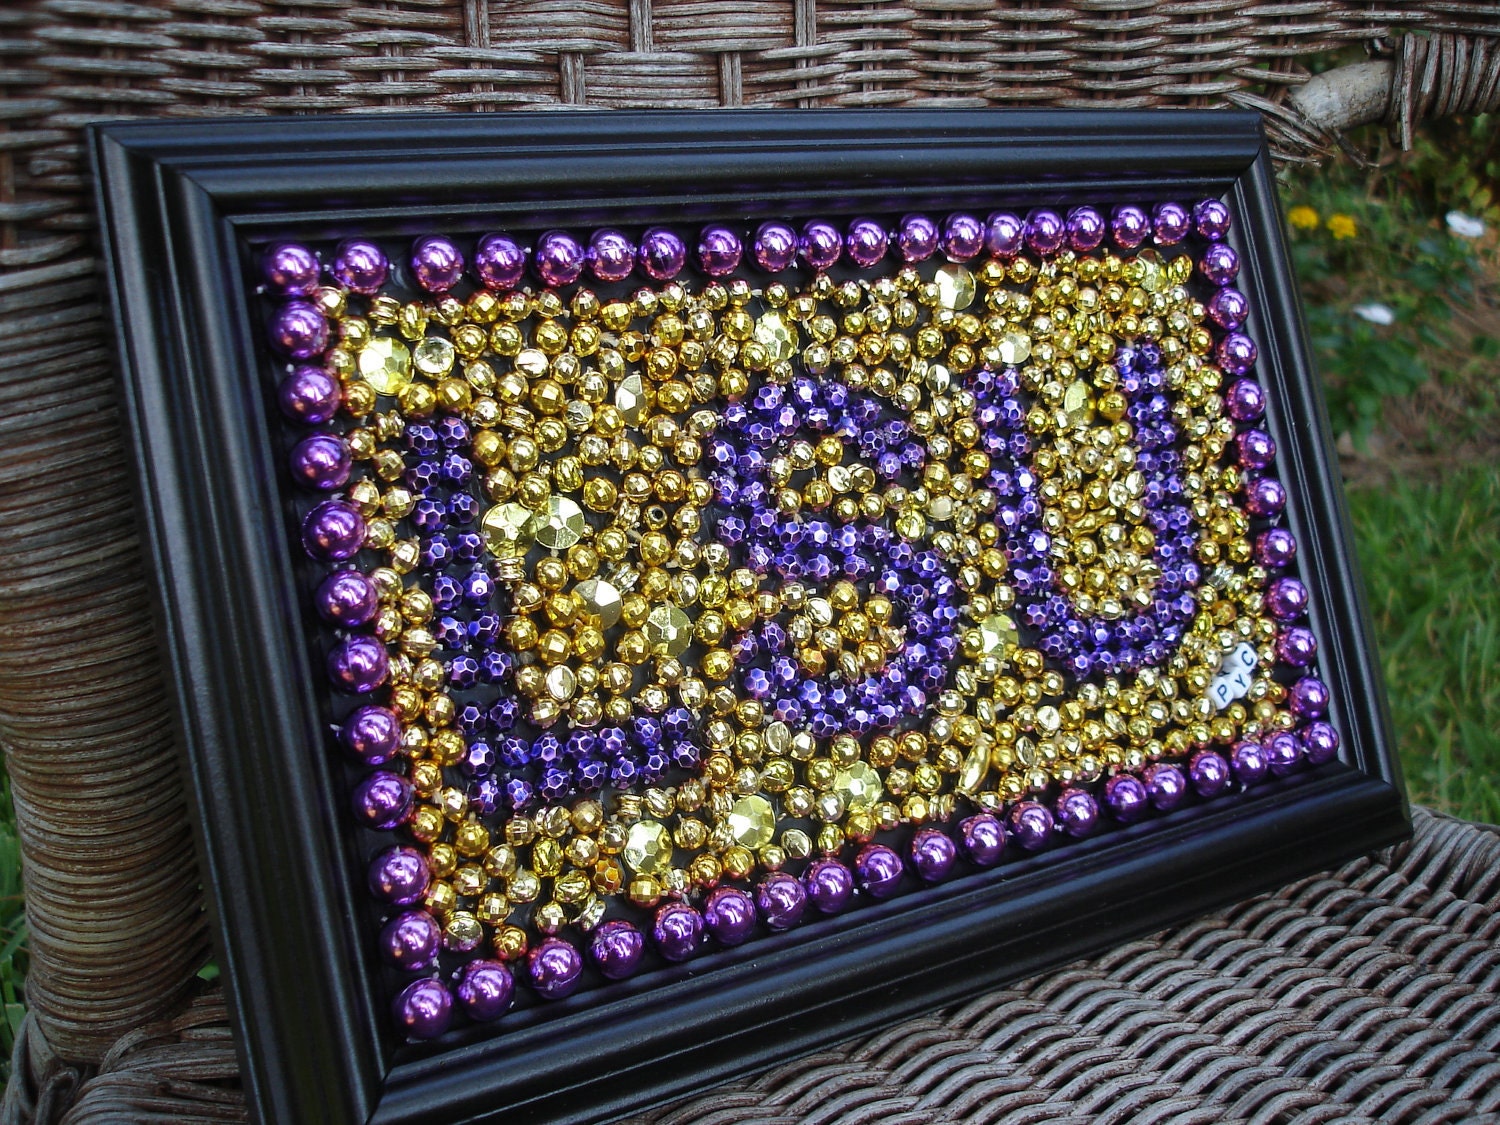 Custom Order LSU framed Mardi Gras bead art purple and gold Christmas orders only to be completed and shipped after Christmas